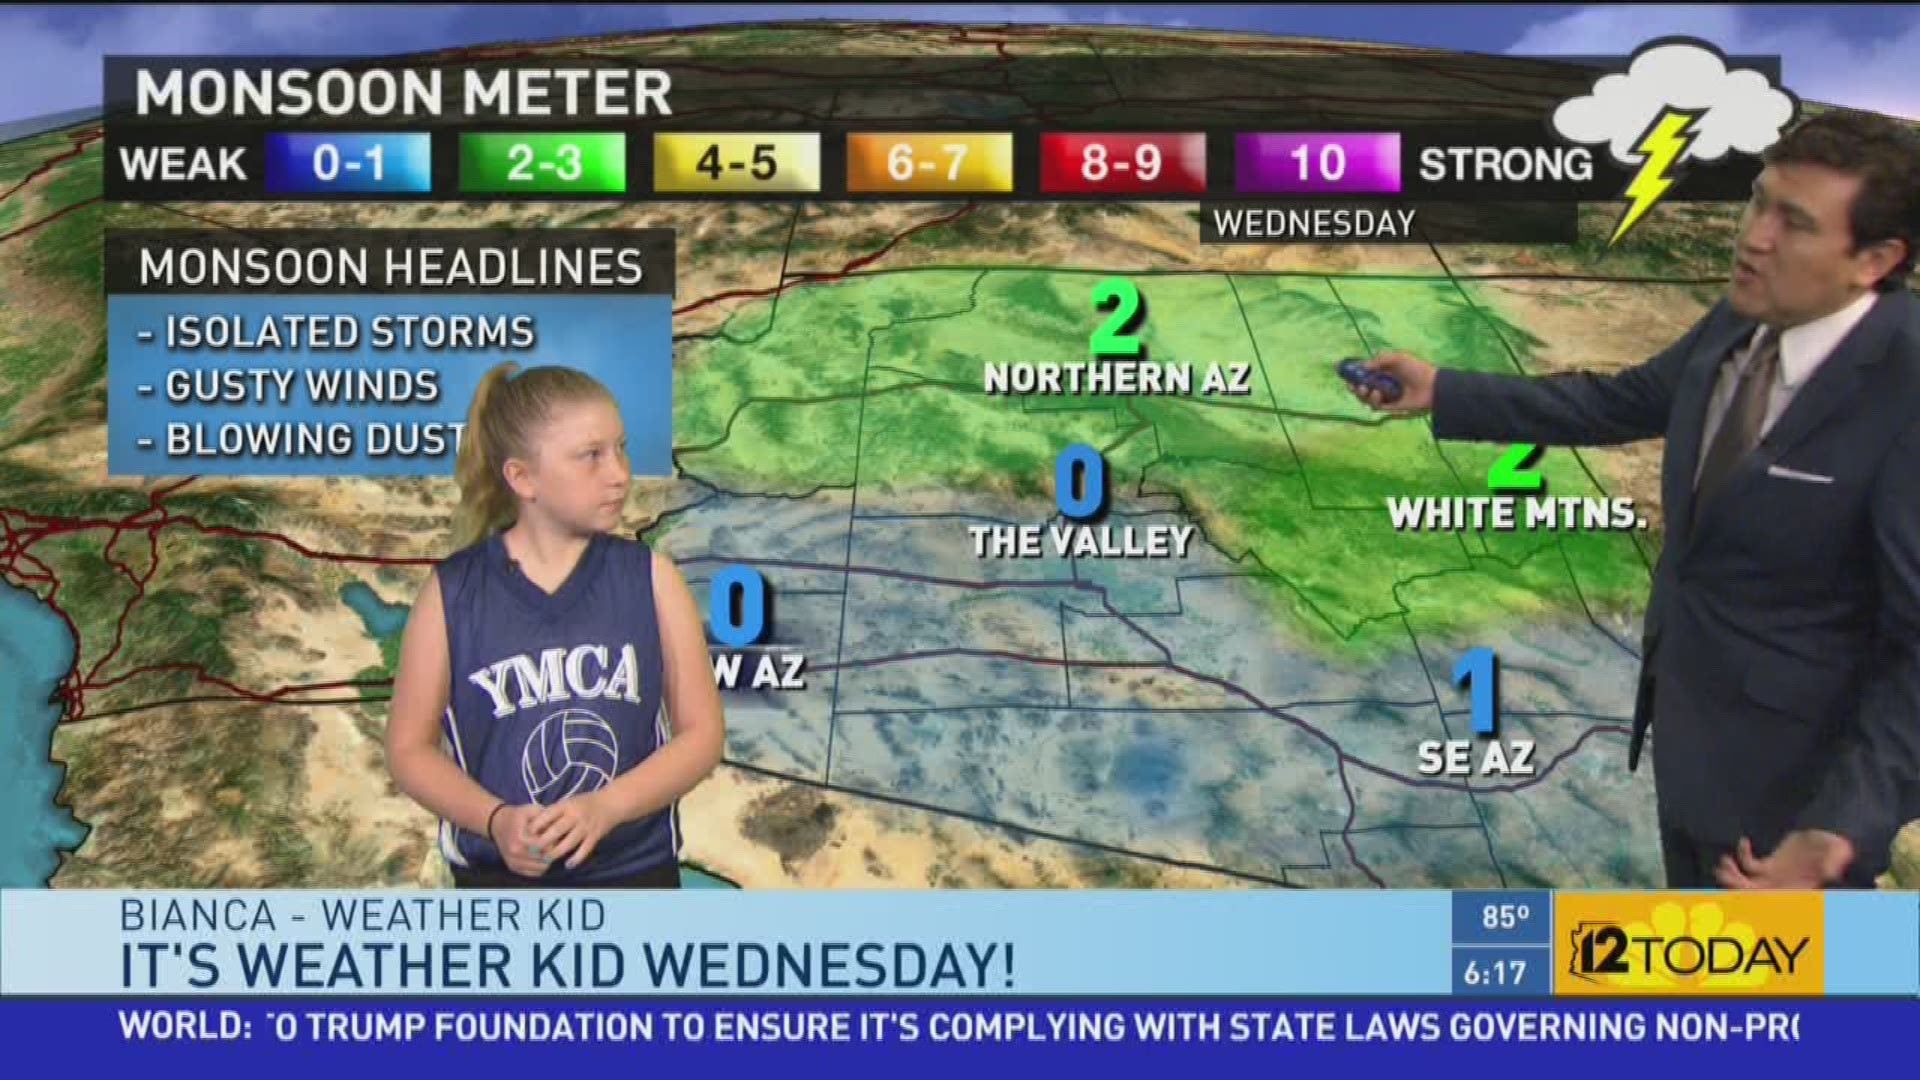 Bianca gives a shout-out to her favorite teachers and helps Jimmy with the forecast.